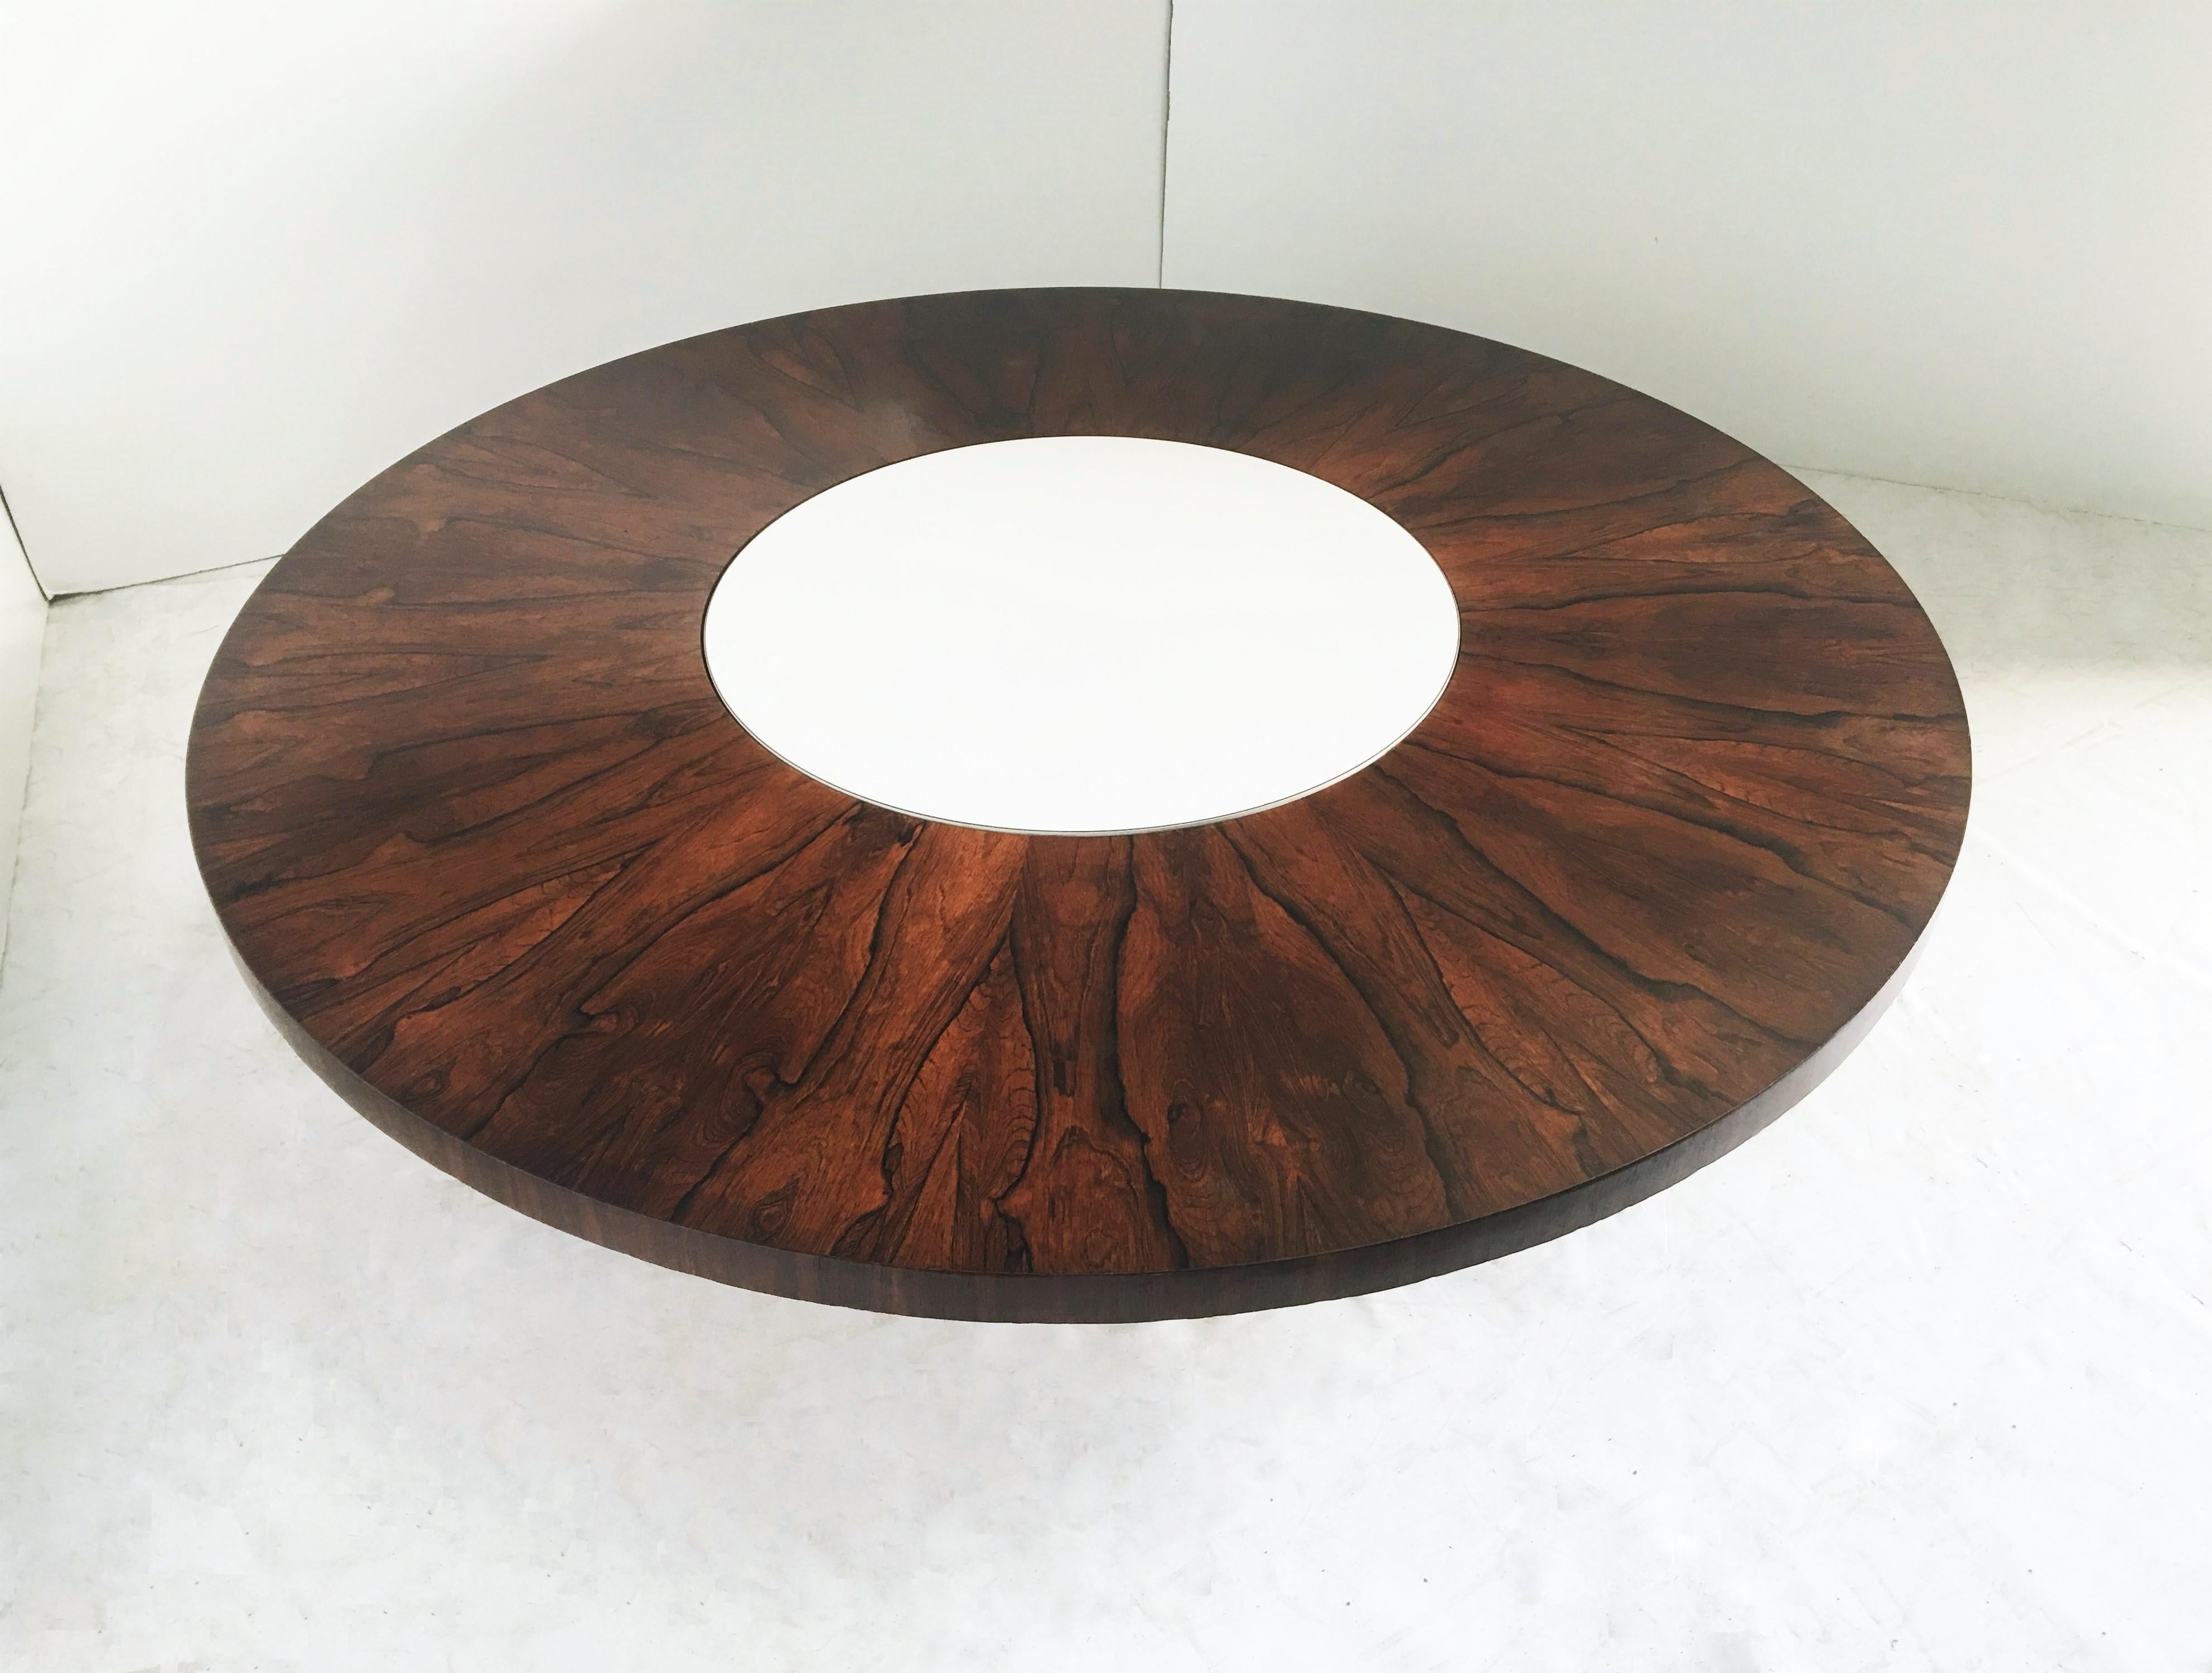 This incredible rotating Lazy-Susan cocktail table was designed by Milo Baughman for Thayer Coggin. Designed and debuted in 1968 as part of the Environment 70 Collection. Featuring a stunning refinished rosewood top with vivid grain and detail on a